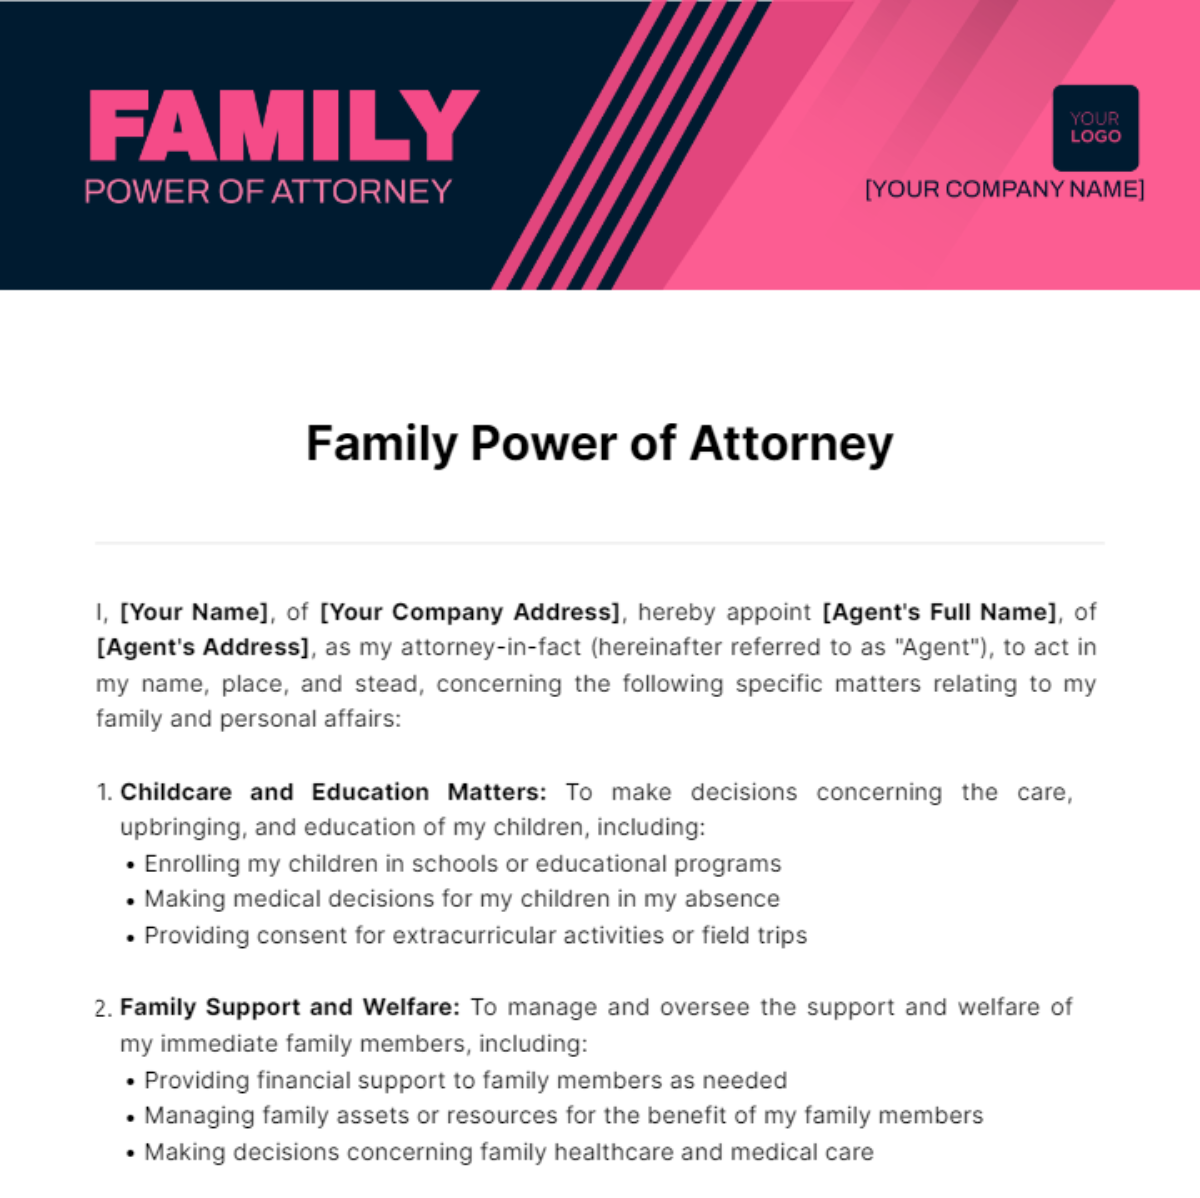 Family Power of Attorney Template